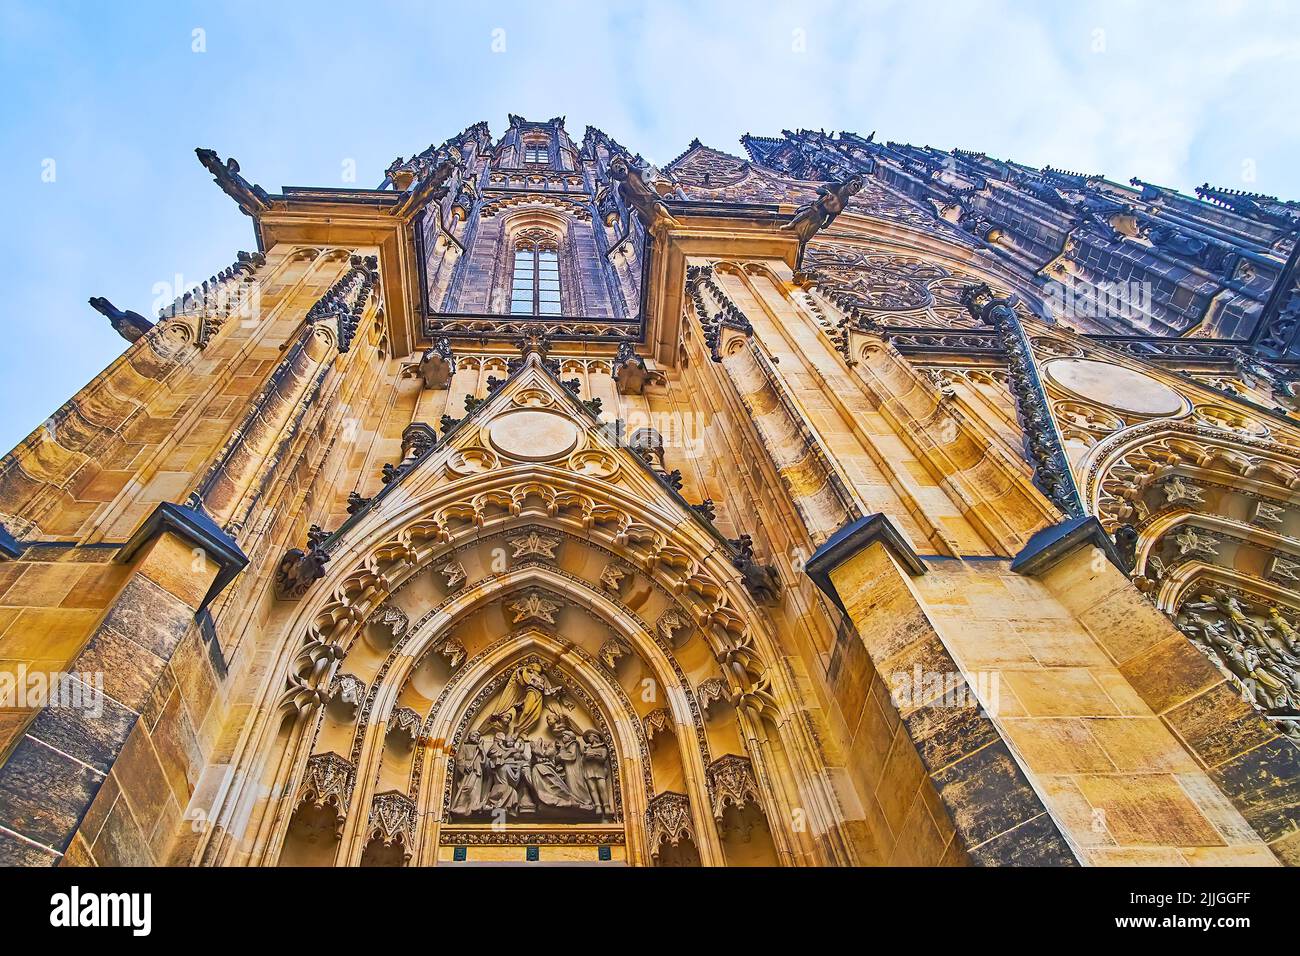 Sandstone outer wall of medieval Gothic St Vitus Cathedral with fine carvings, small wall sculptures, nuemrous decors and gargoyles, Prague, Czech Rep Stock Photo